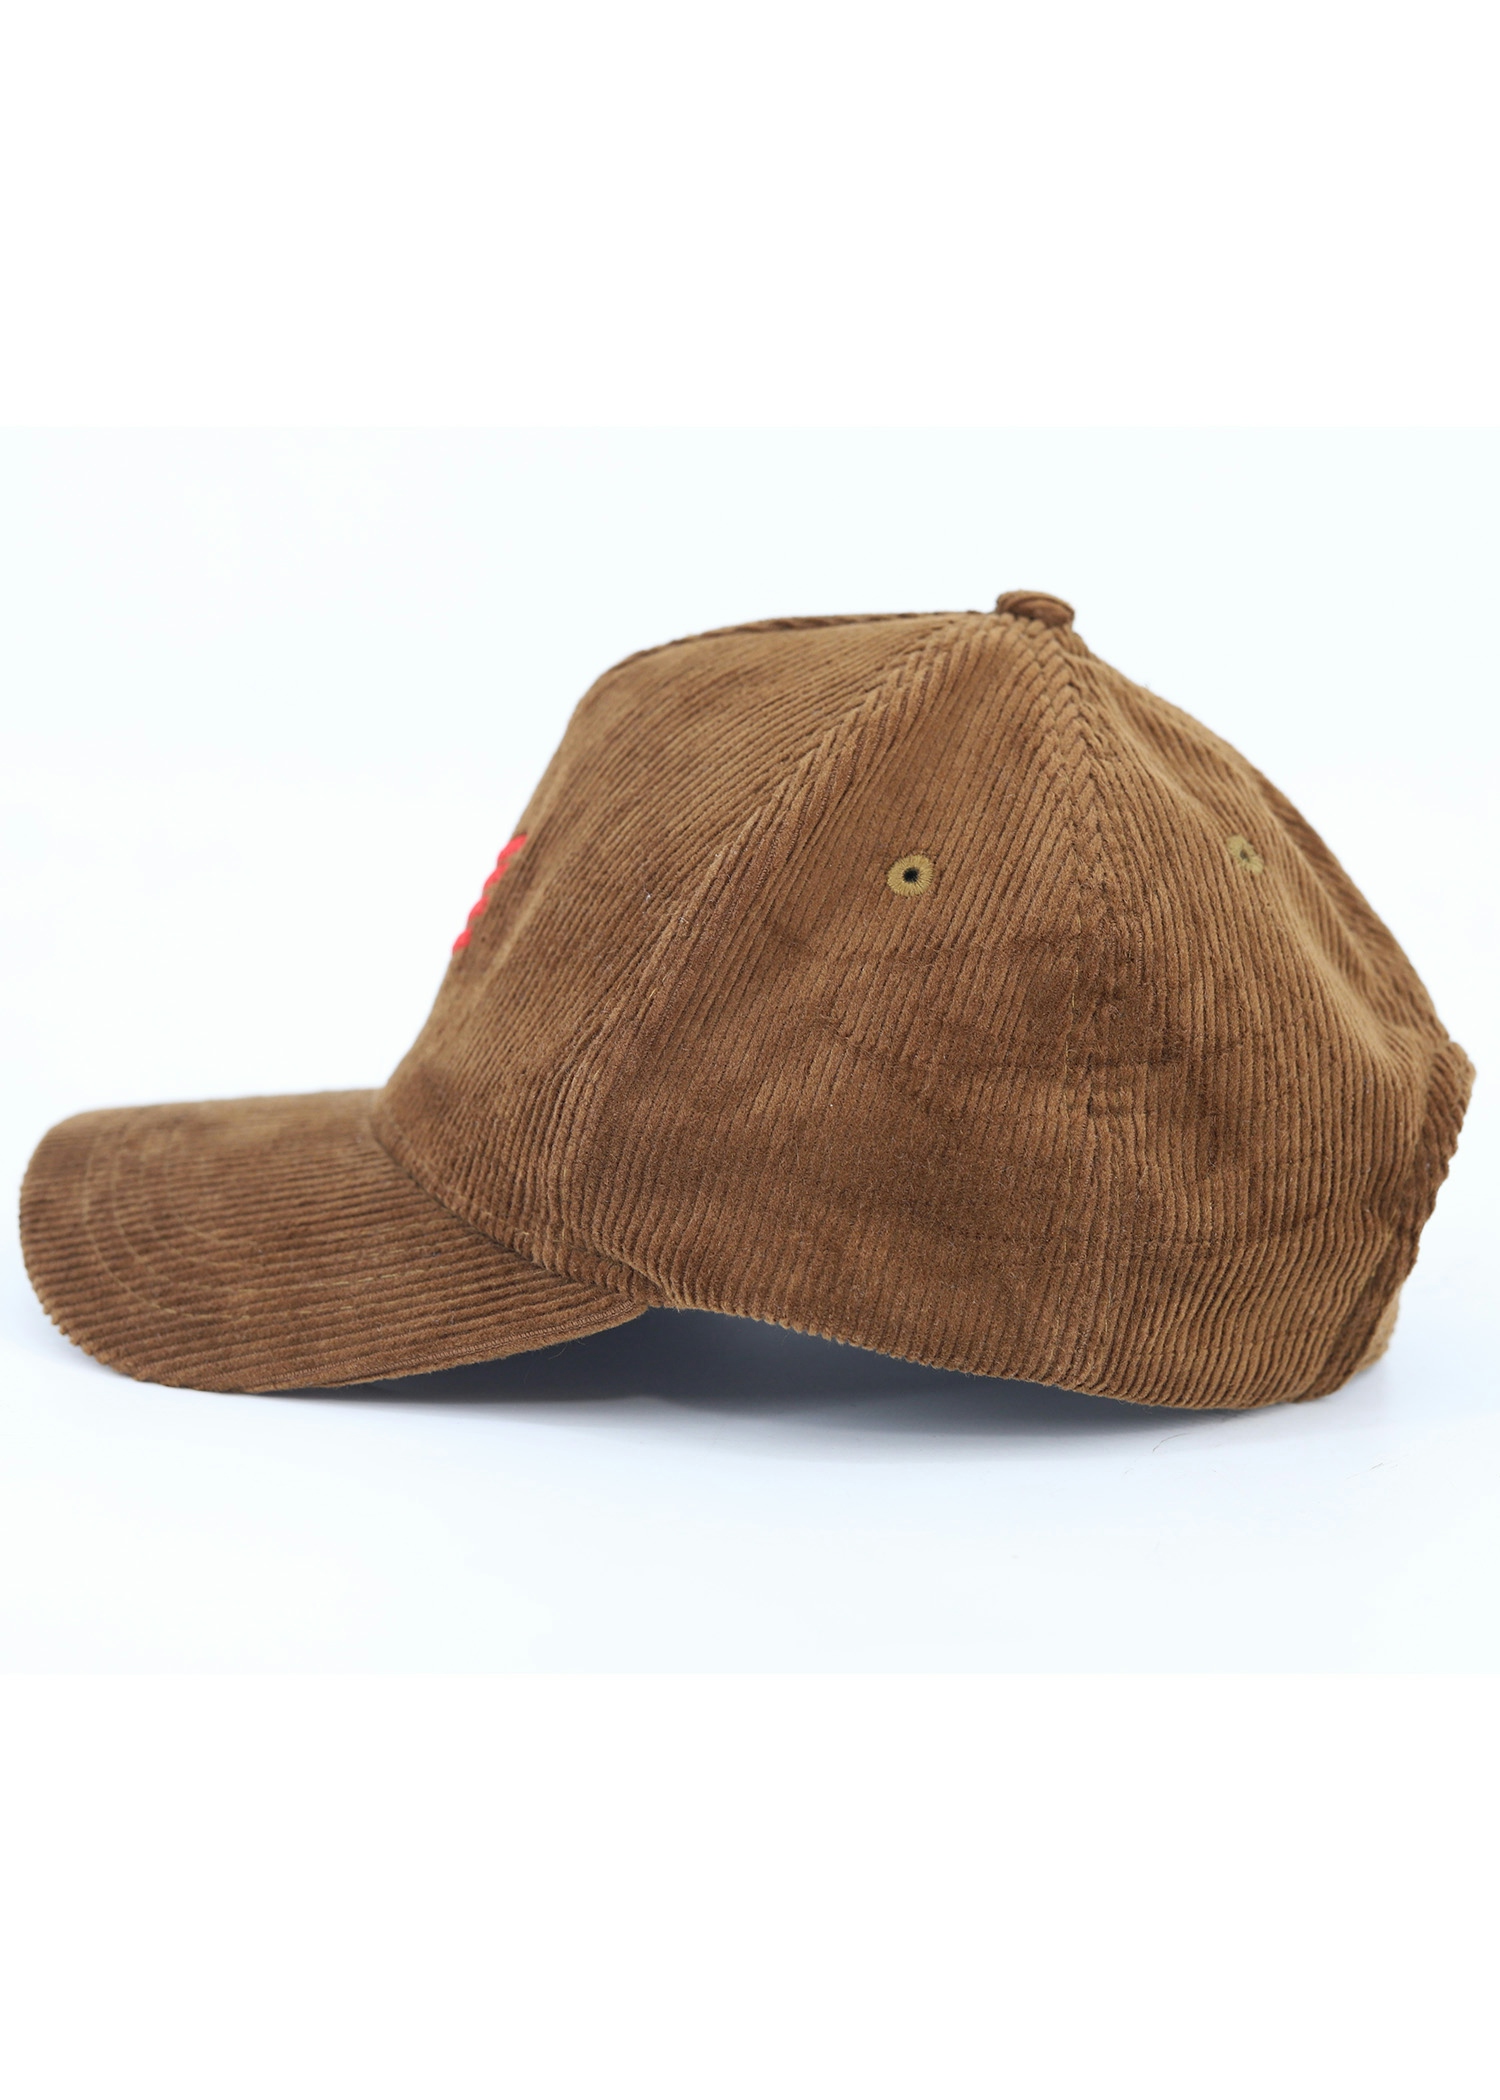 rooster cord cap brown color side view